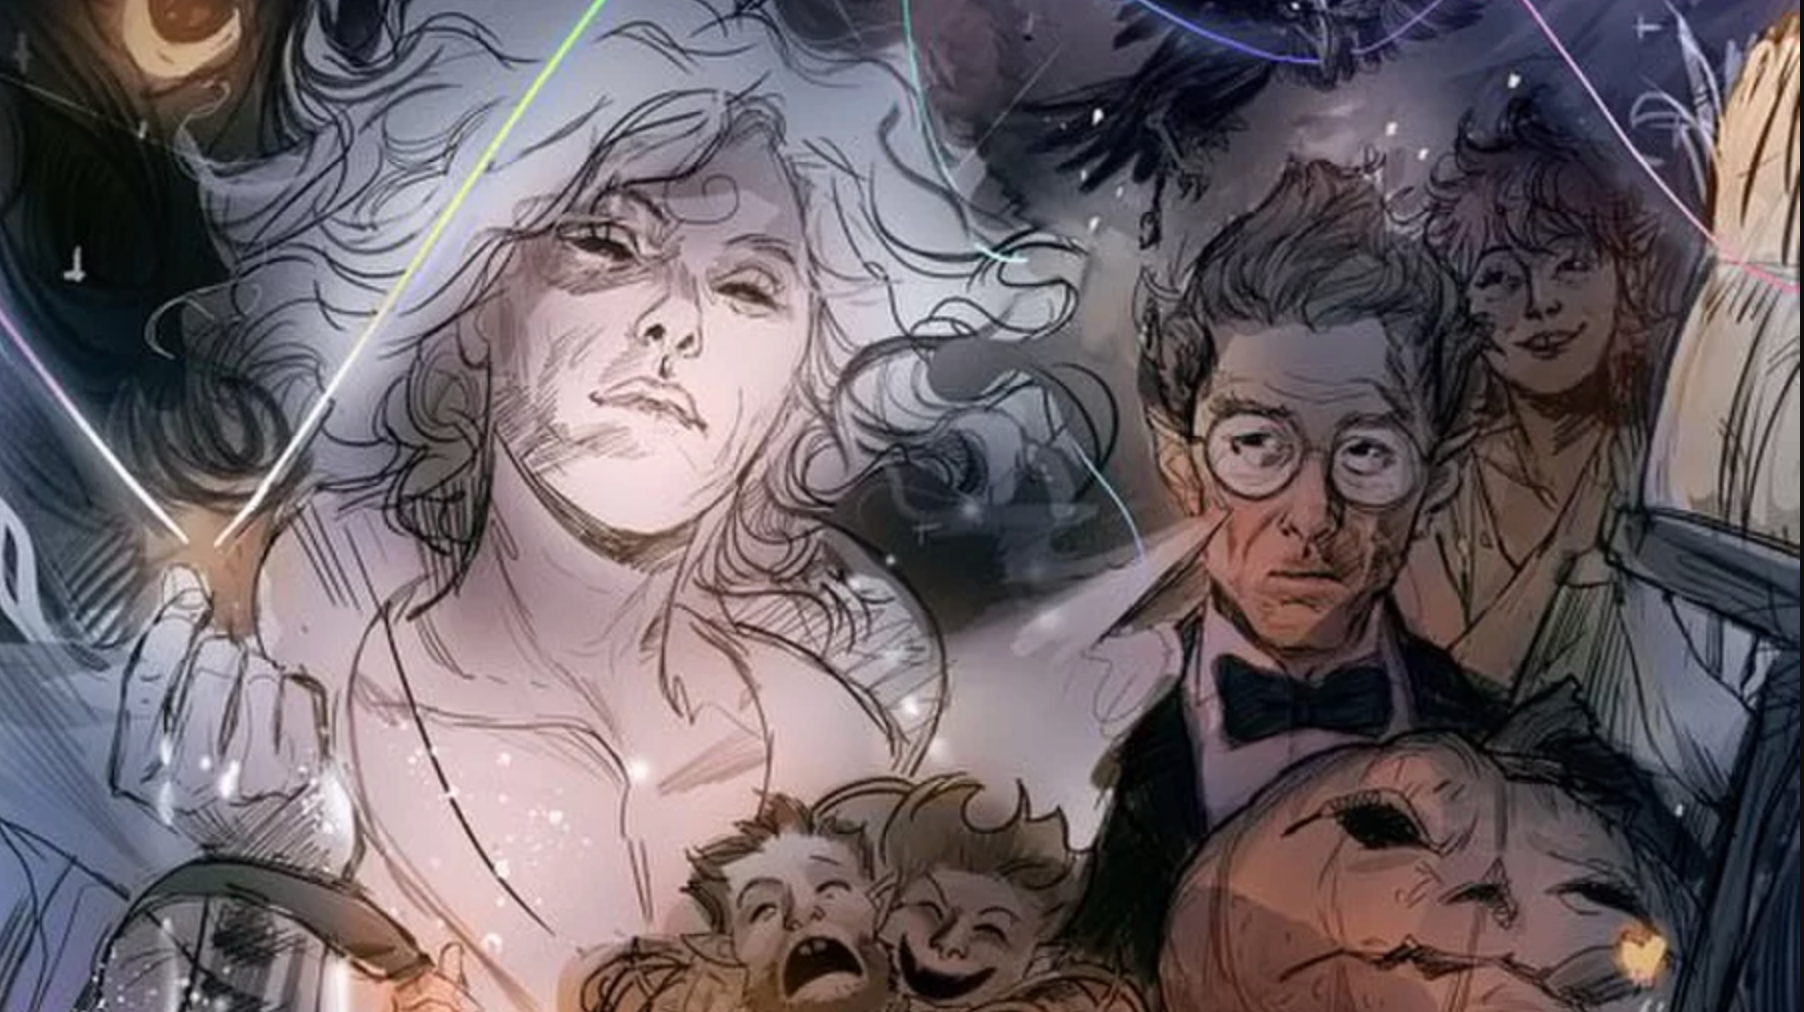 G. Willow Wilson And Nick Robles Will Take The Reins Of The Dreaming Next Year